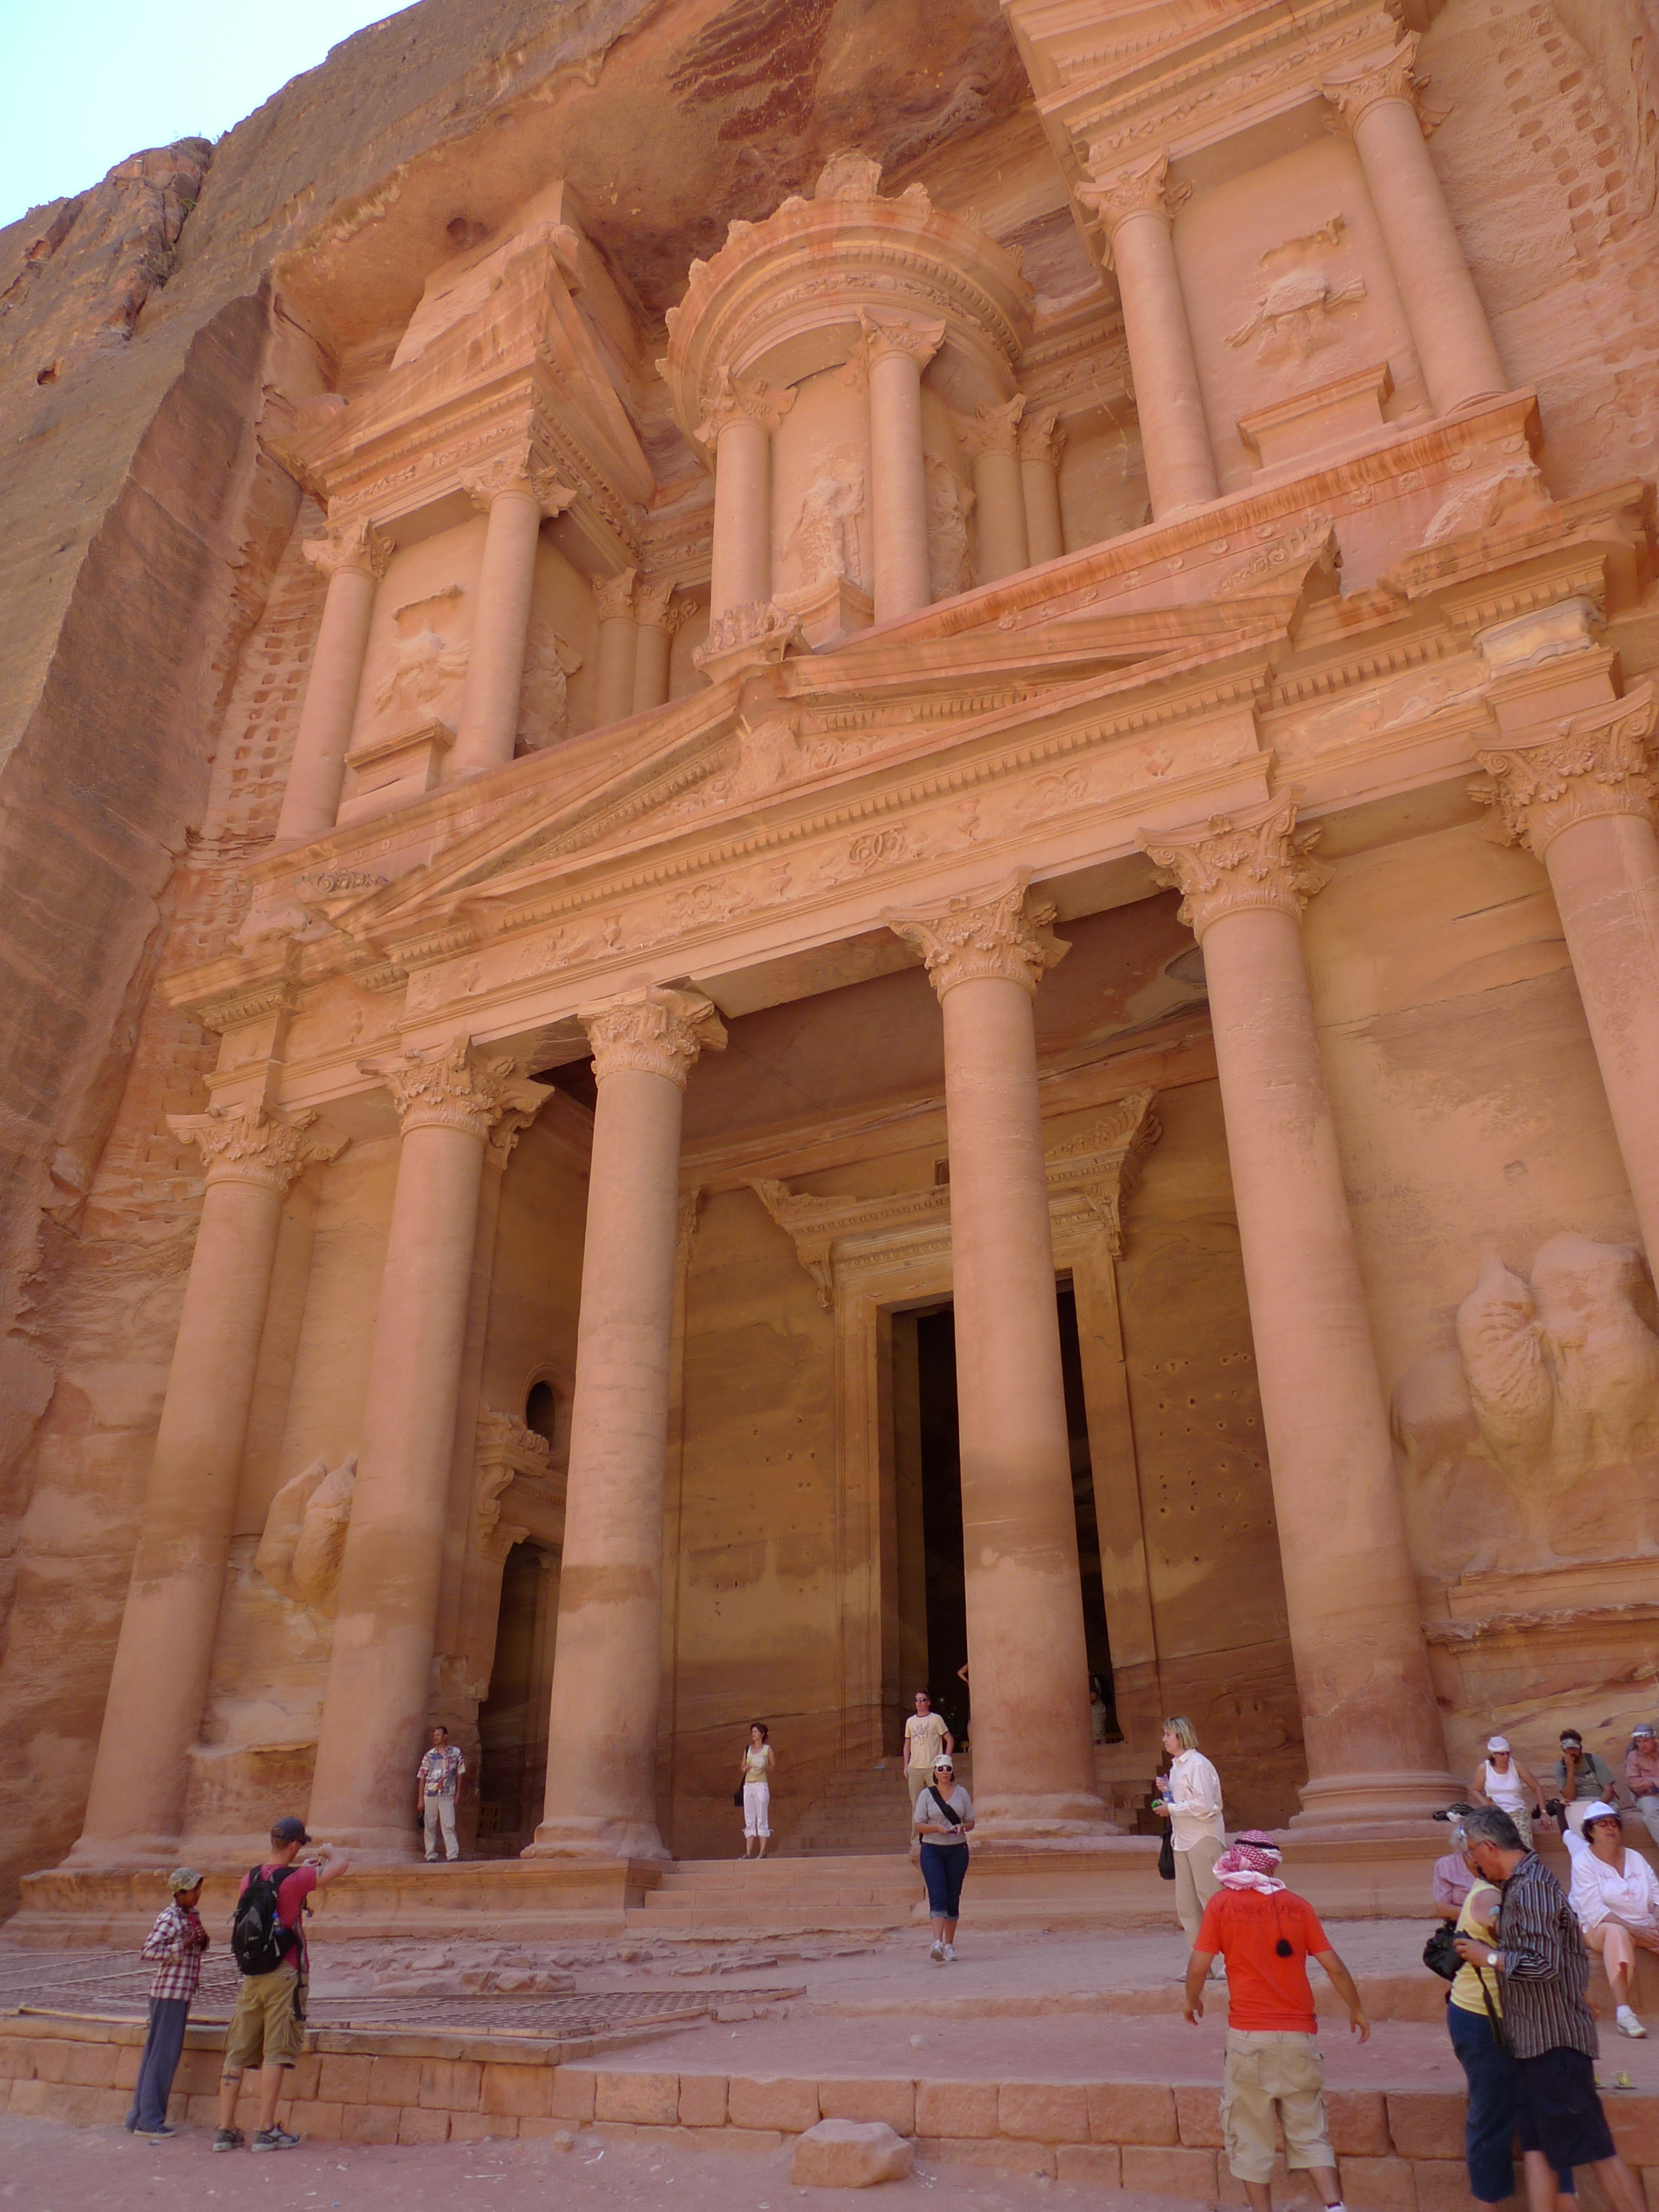 Jordan is the best country for family travel in the Middle East (and a new Petra video)